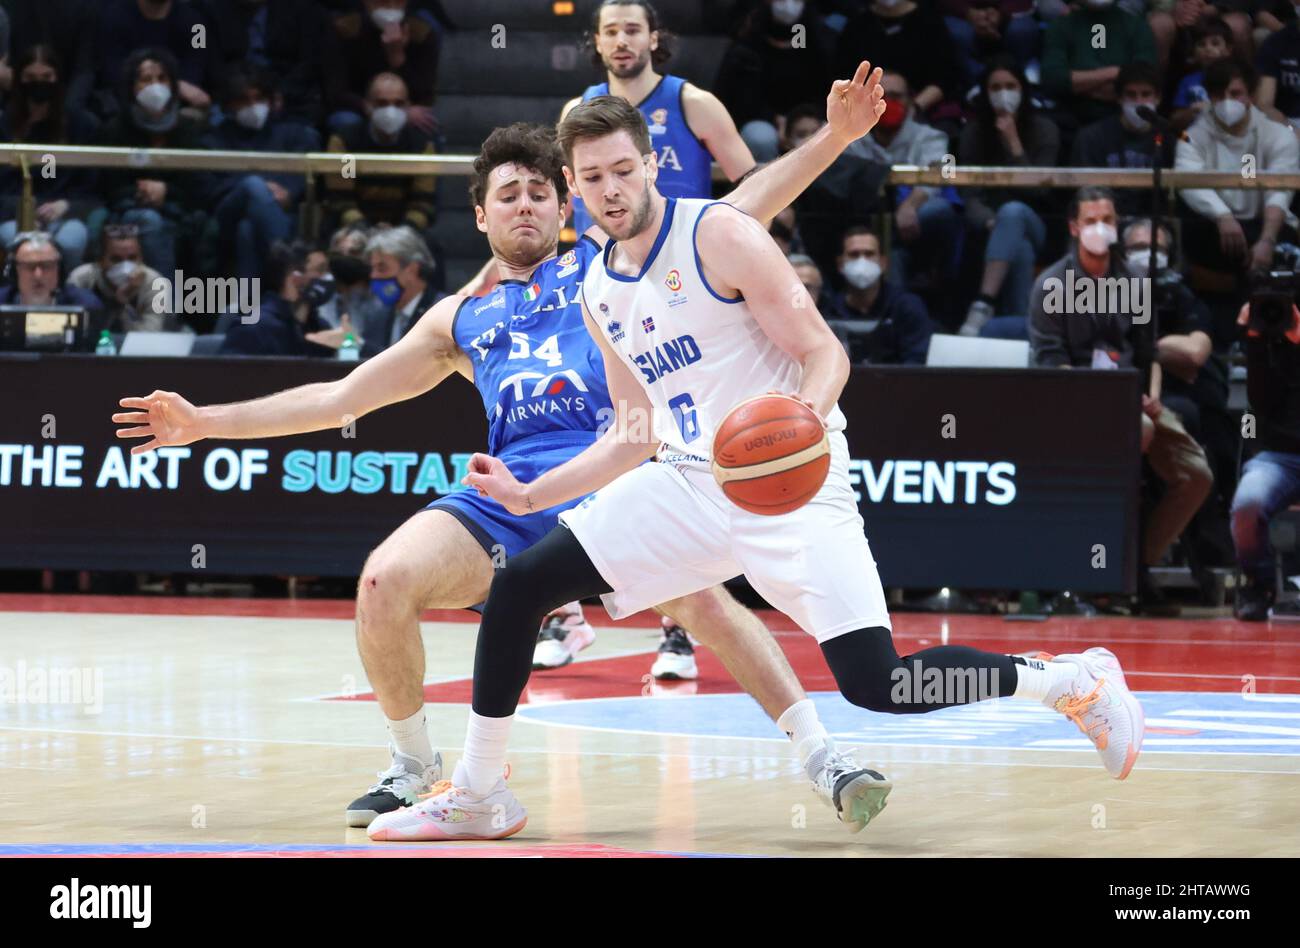 Jon Axel Gudmundsson (Iceland) (R) thwarted by  Alessandro Pajola (Italy) during the FIBA World Cup 2023 qualifiers game Italy Vs. Iceland at the Paladozza sports palace in Bologna, February 27, 2022 - Photo: Michele Nucci Stock Photo